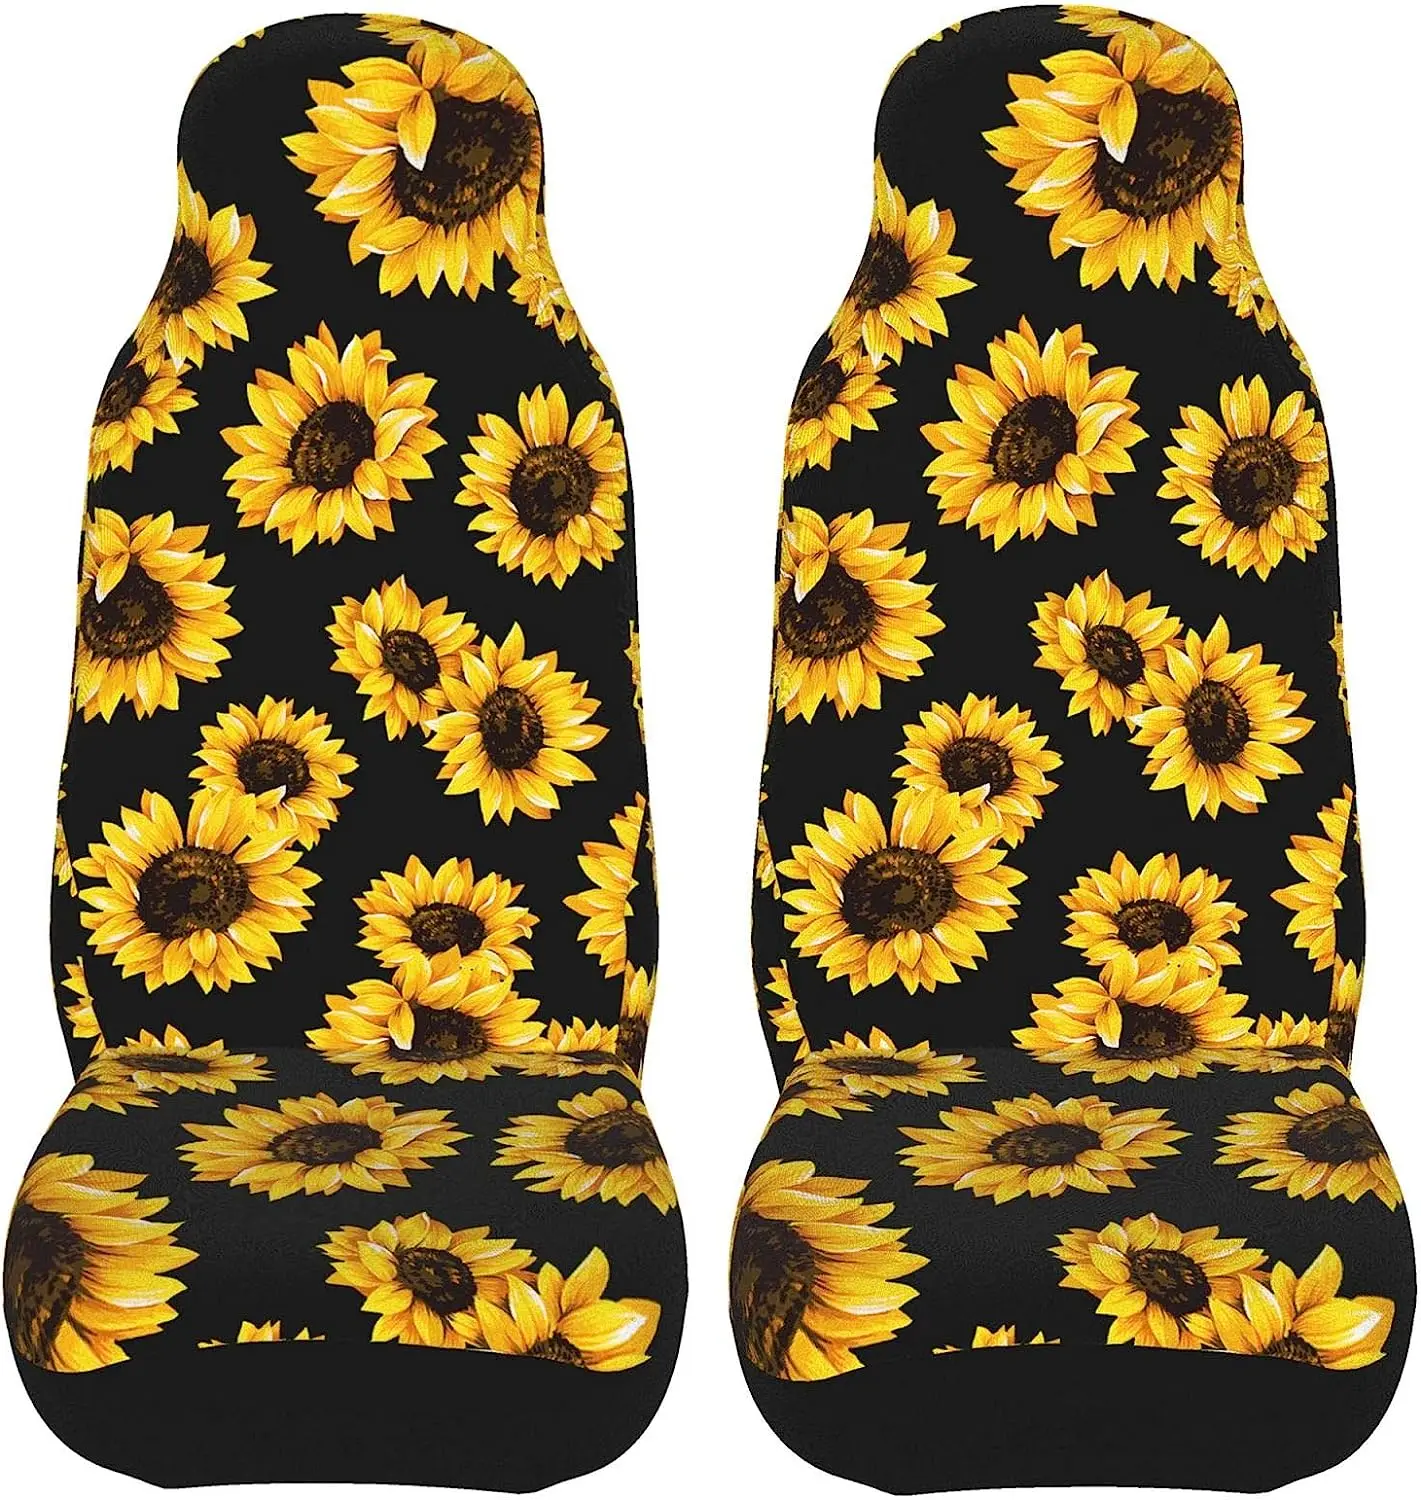 

Car Front Seat Covers 2 PCS Vehicle Seat Protector Car Mat Covers Fit Most Cars Sedan SUV Van Sunflower